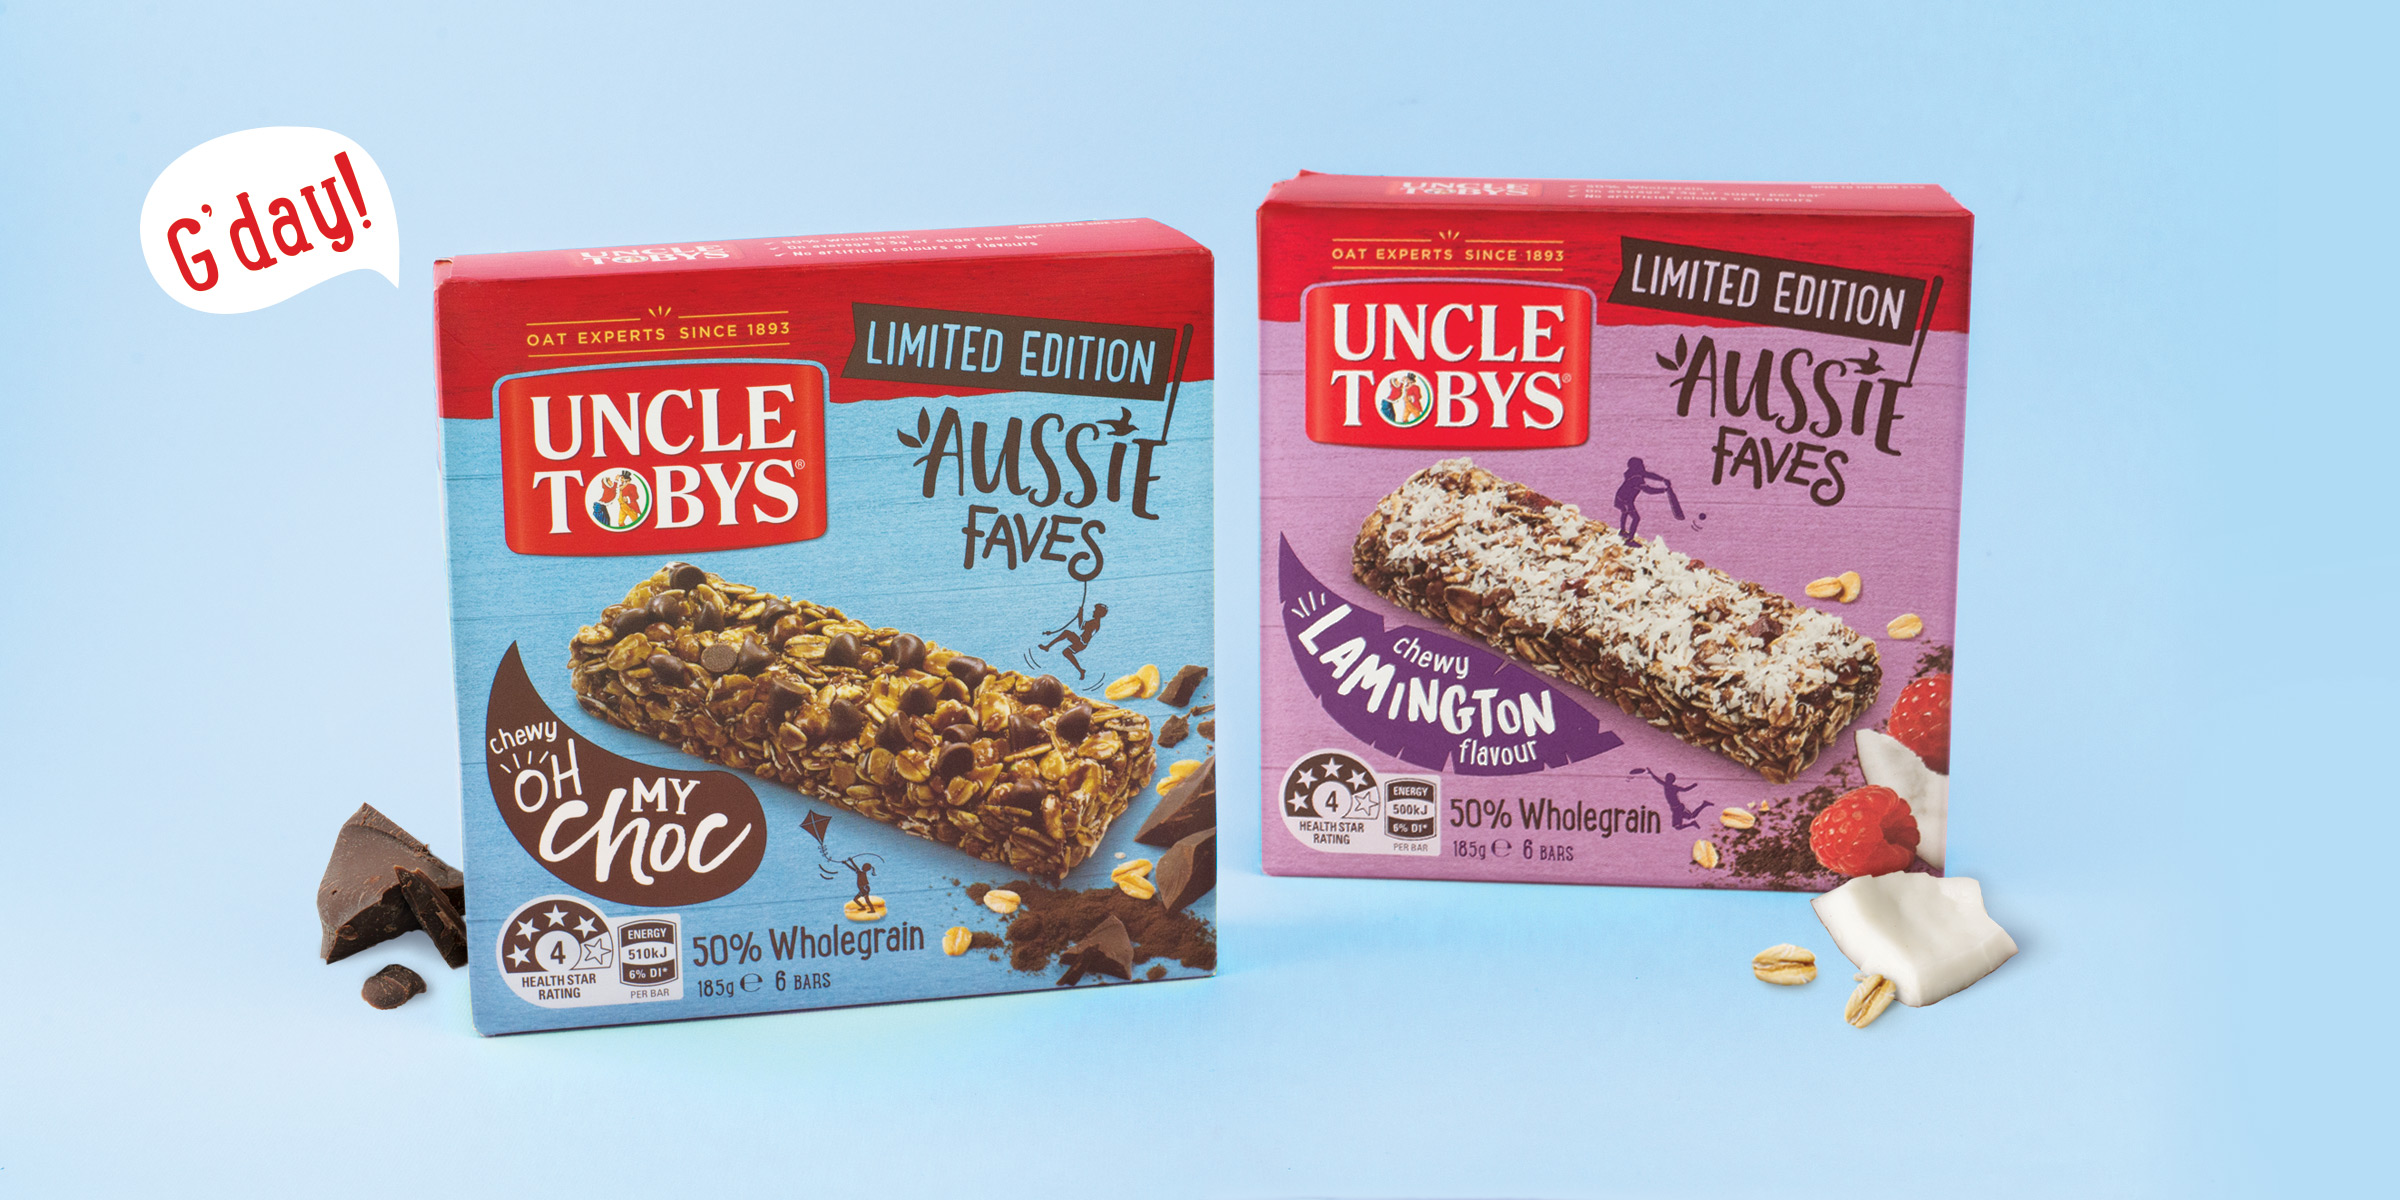 Boxer-and-Co-Uncle_Tobys-Aussie_Faves__Packaging-redesign-brand_Chocolate_Muesli_Bars_Hero